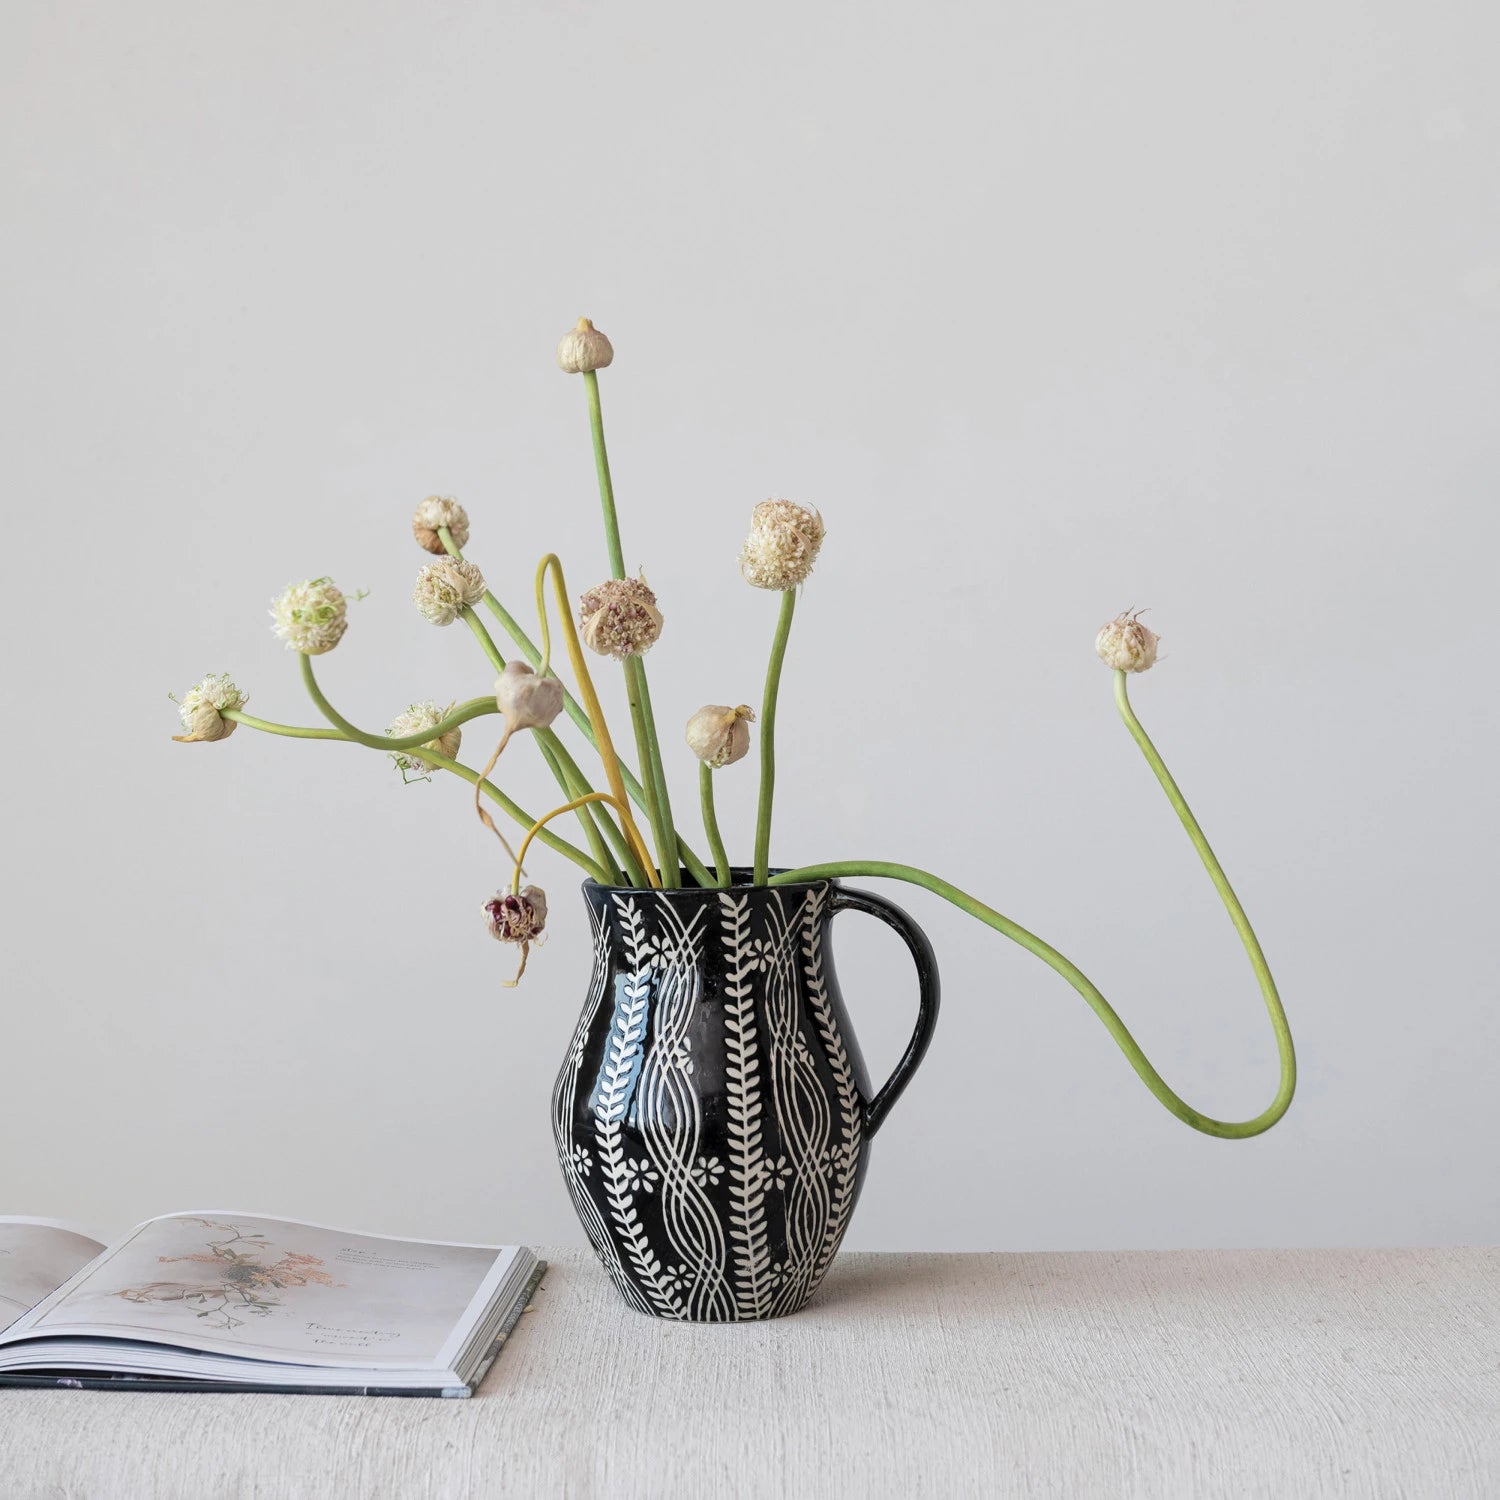 black and cream pitcher filled with onion grasses set on a table next to an open book.